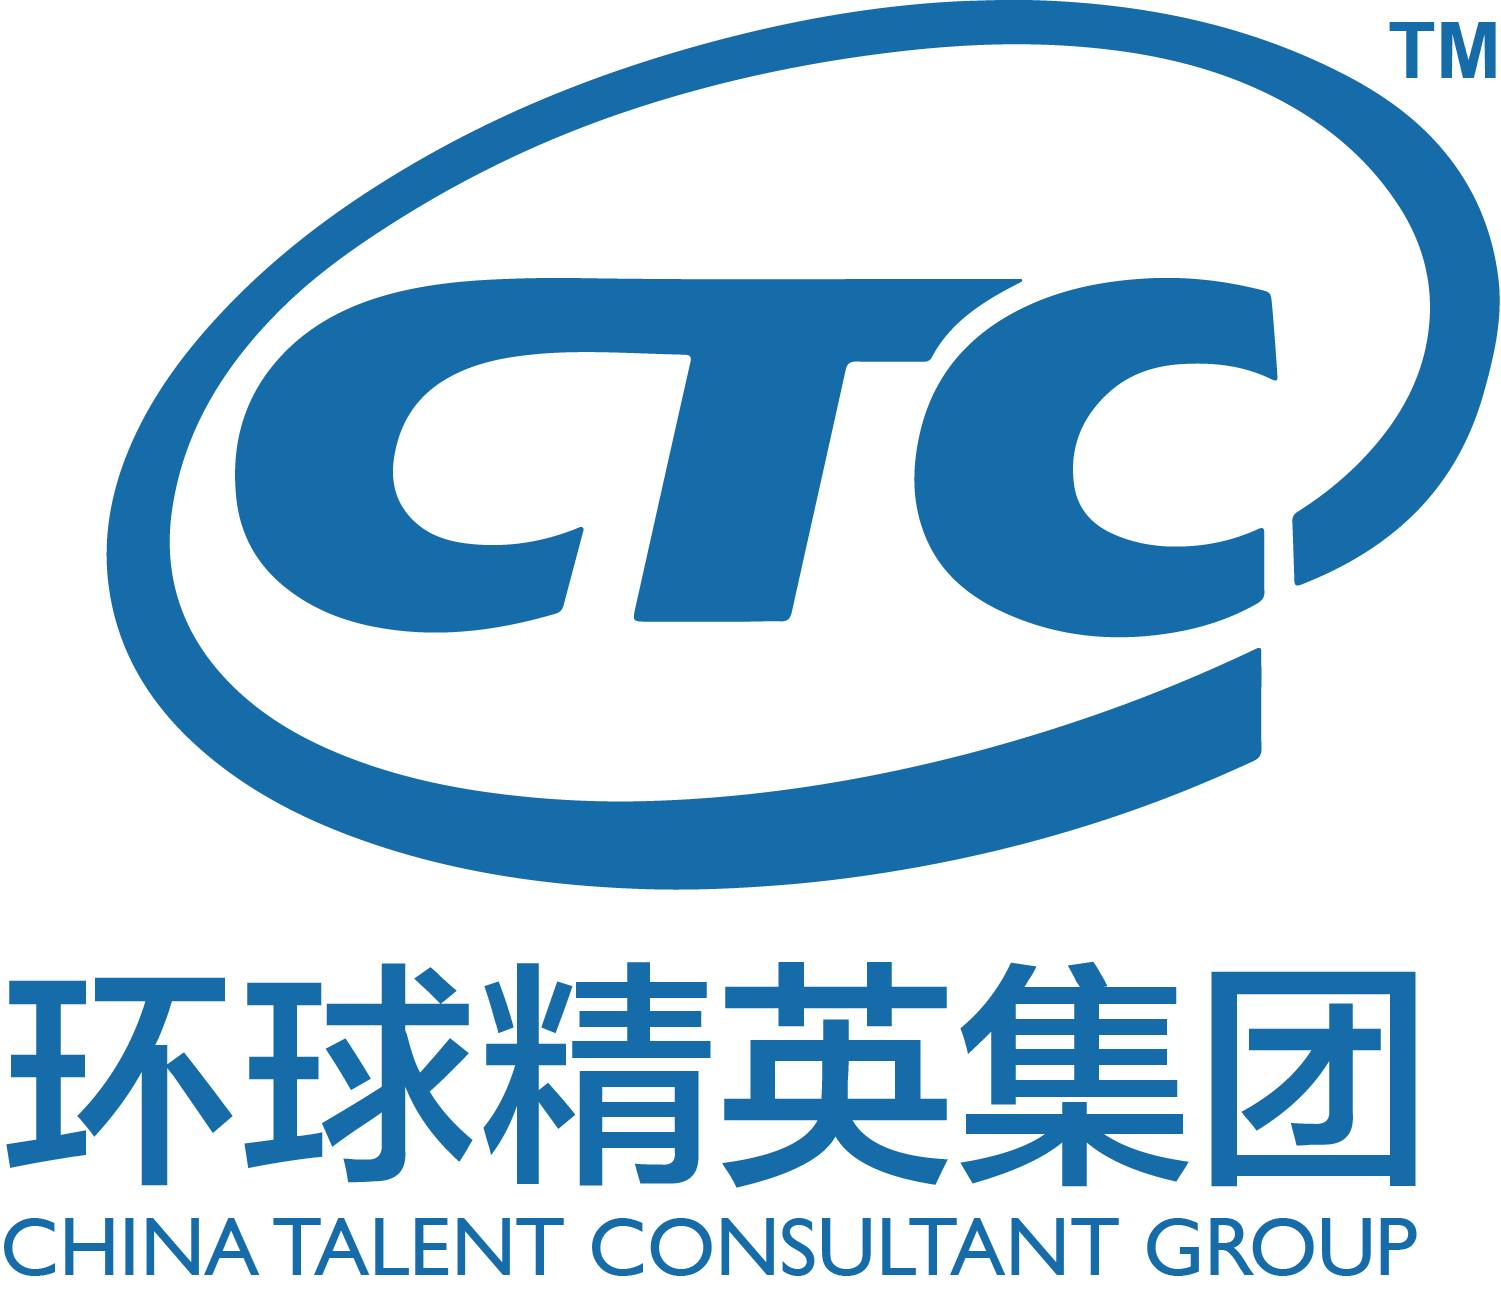 China Talent Consultant